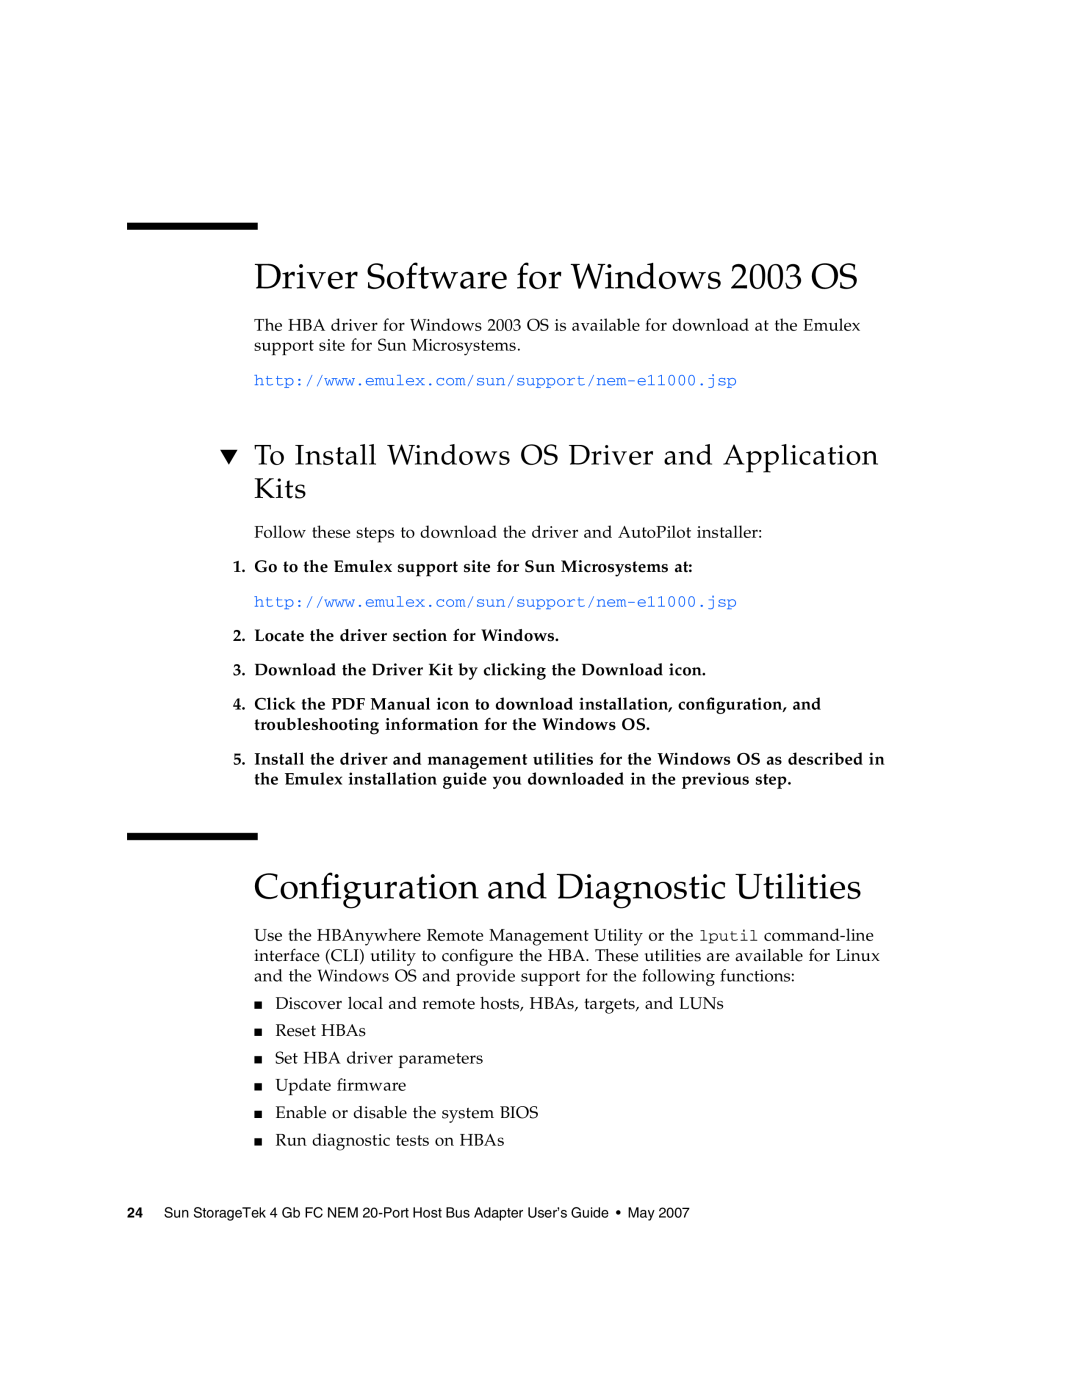 Sun Microsystems 2.0 manual Driver Software for Windows 2003 OS, Configuration and Diagnostic Utilities 